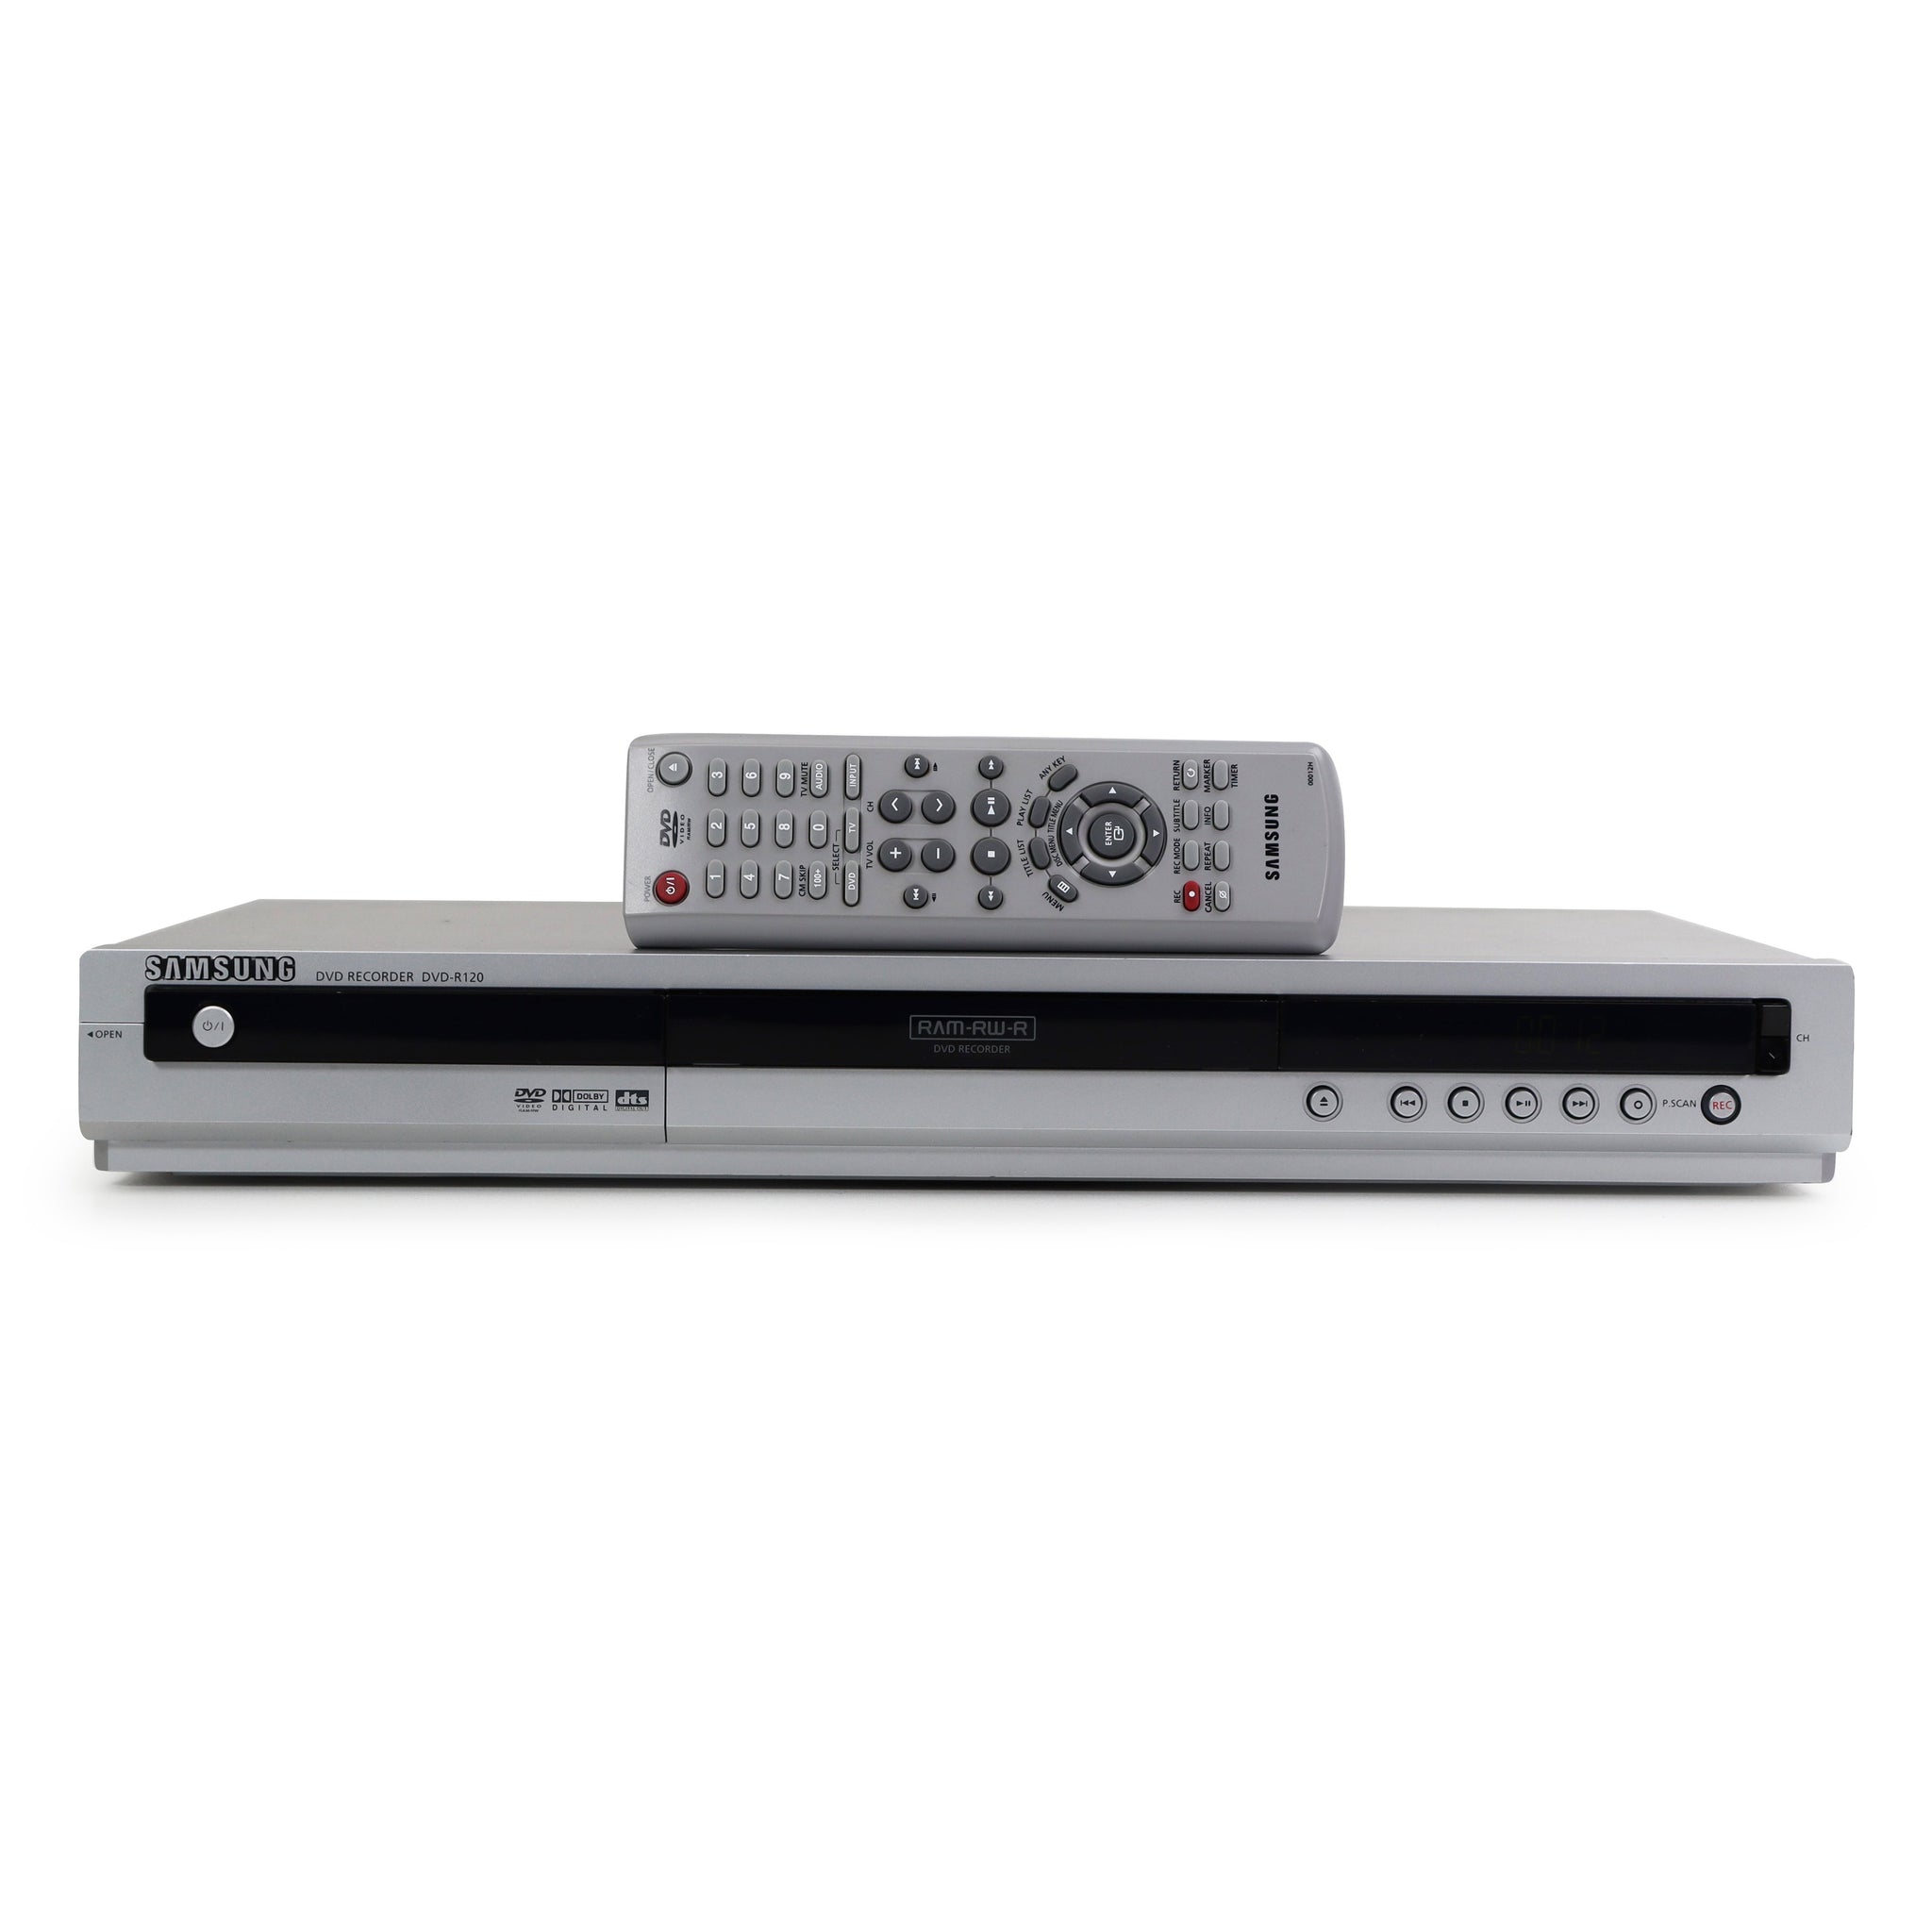 Samsung DVD-R120 DVD and Player Built-in Analog Tuner